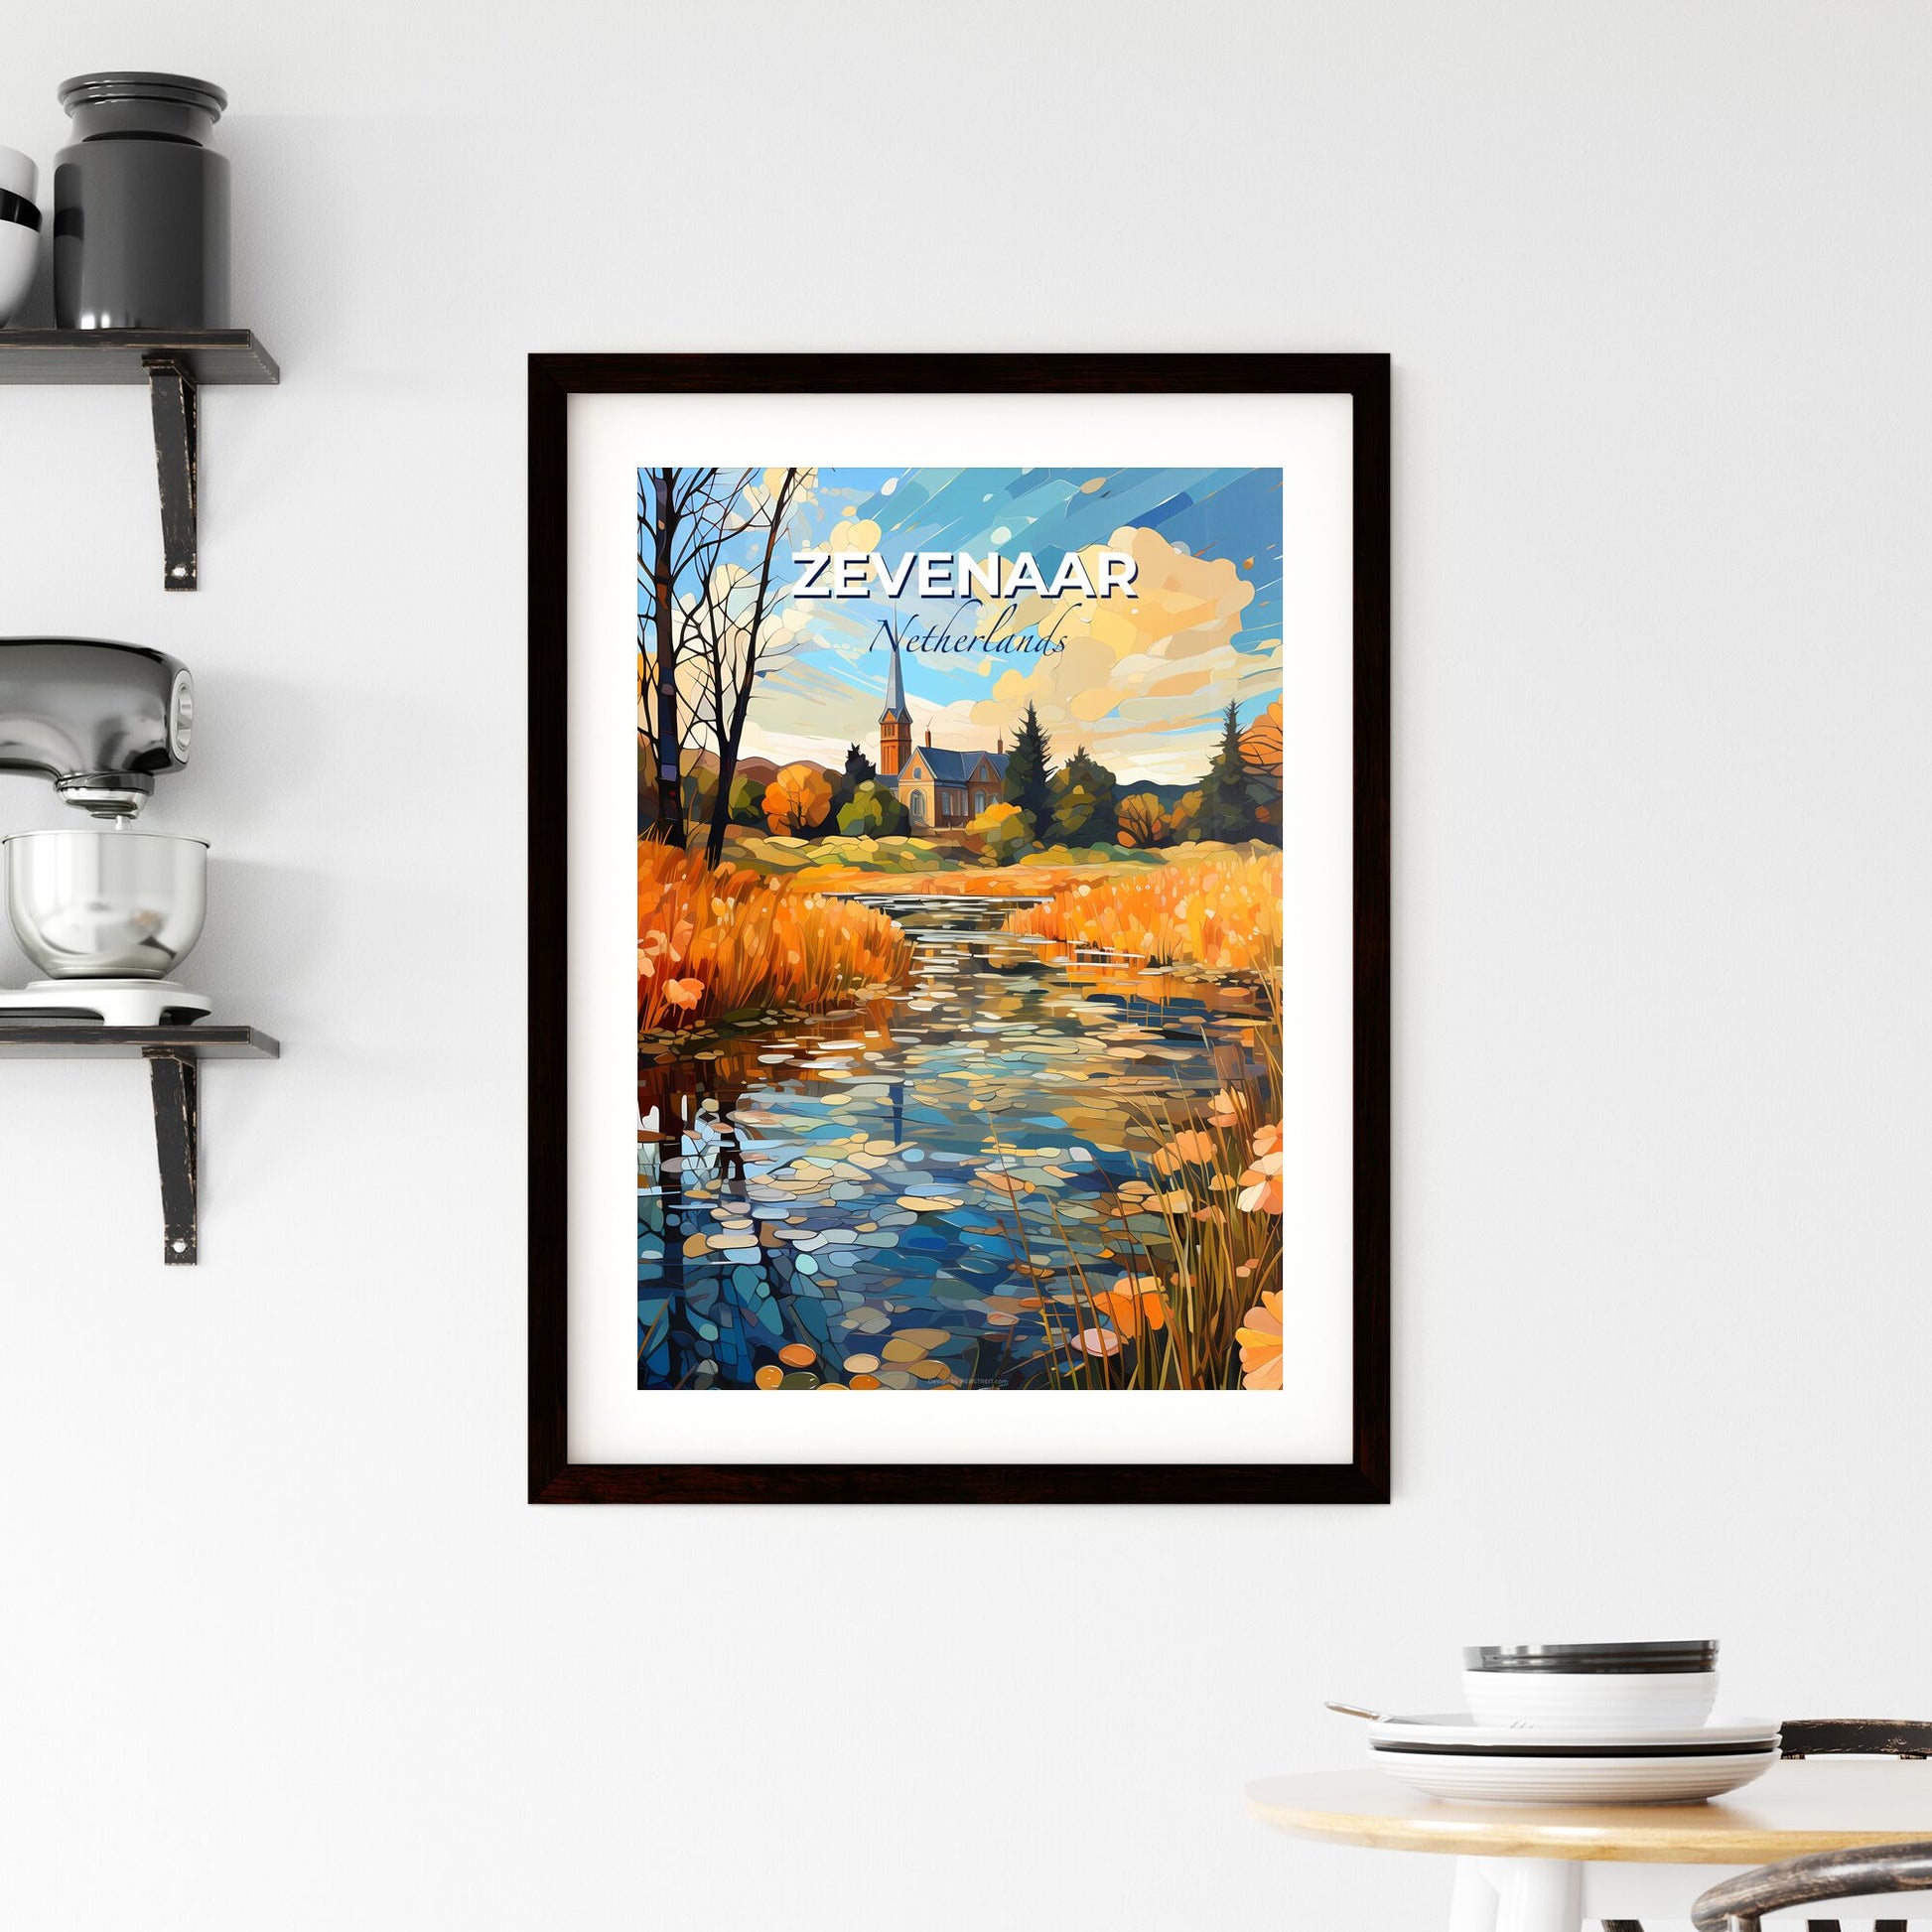 Zevenaar, Netherlands, A Poster of a painting of a church and a river Default Title